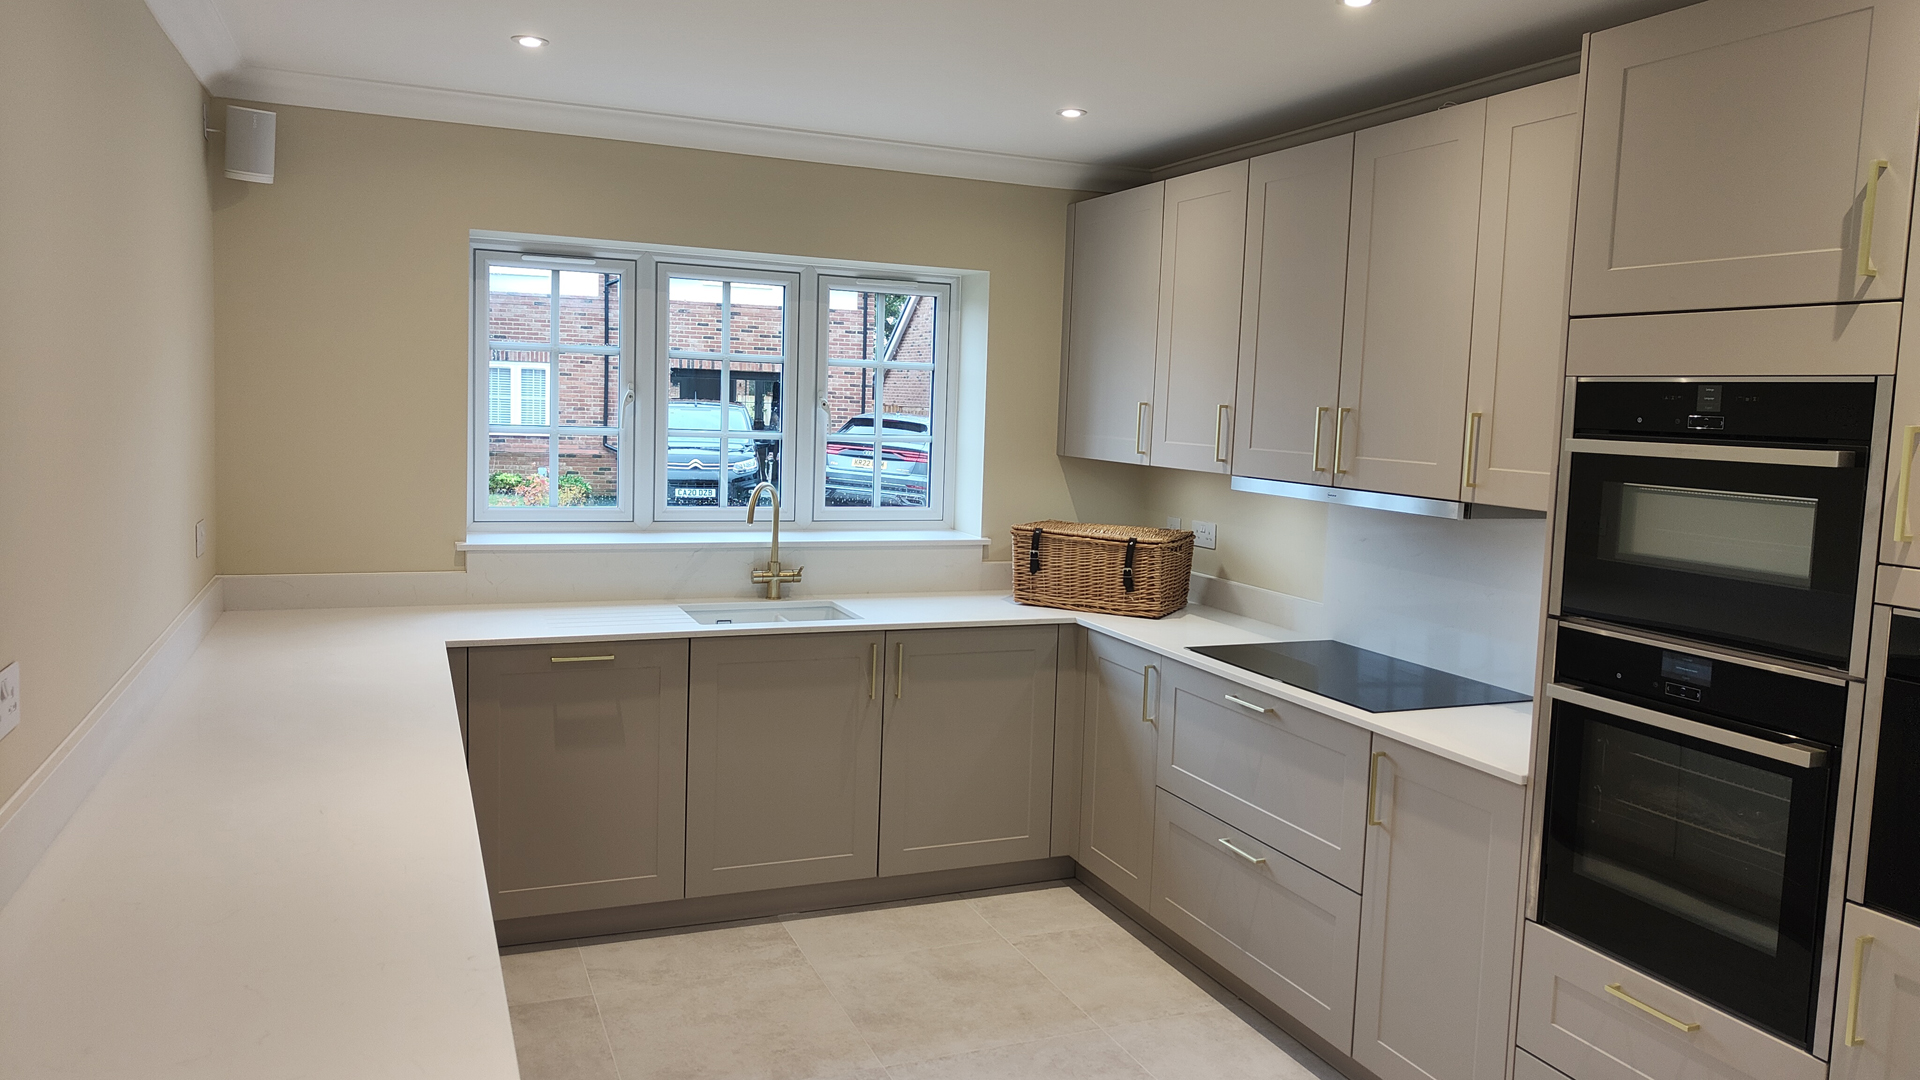 grey shaker kitchen with high level oven and large window above the sink